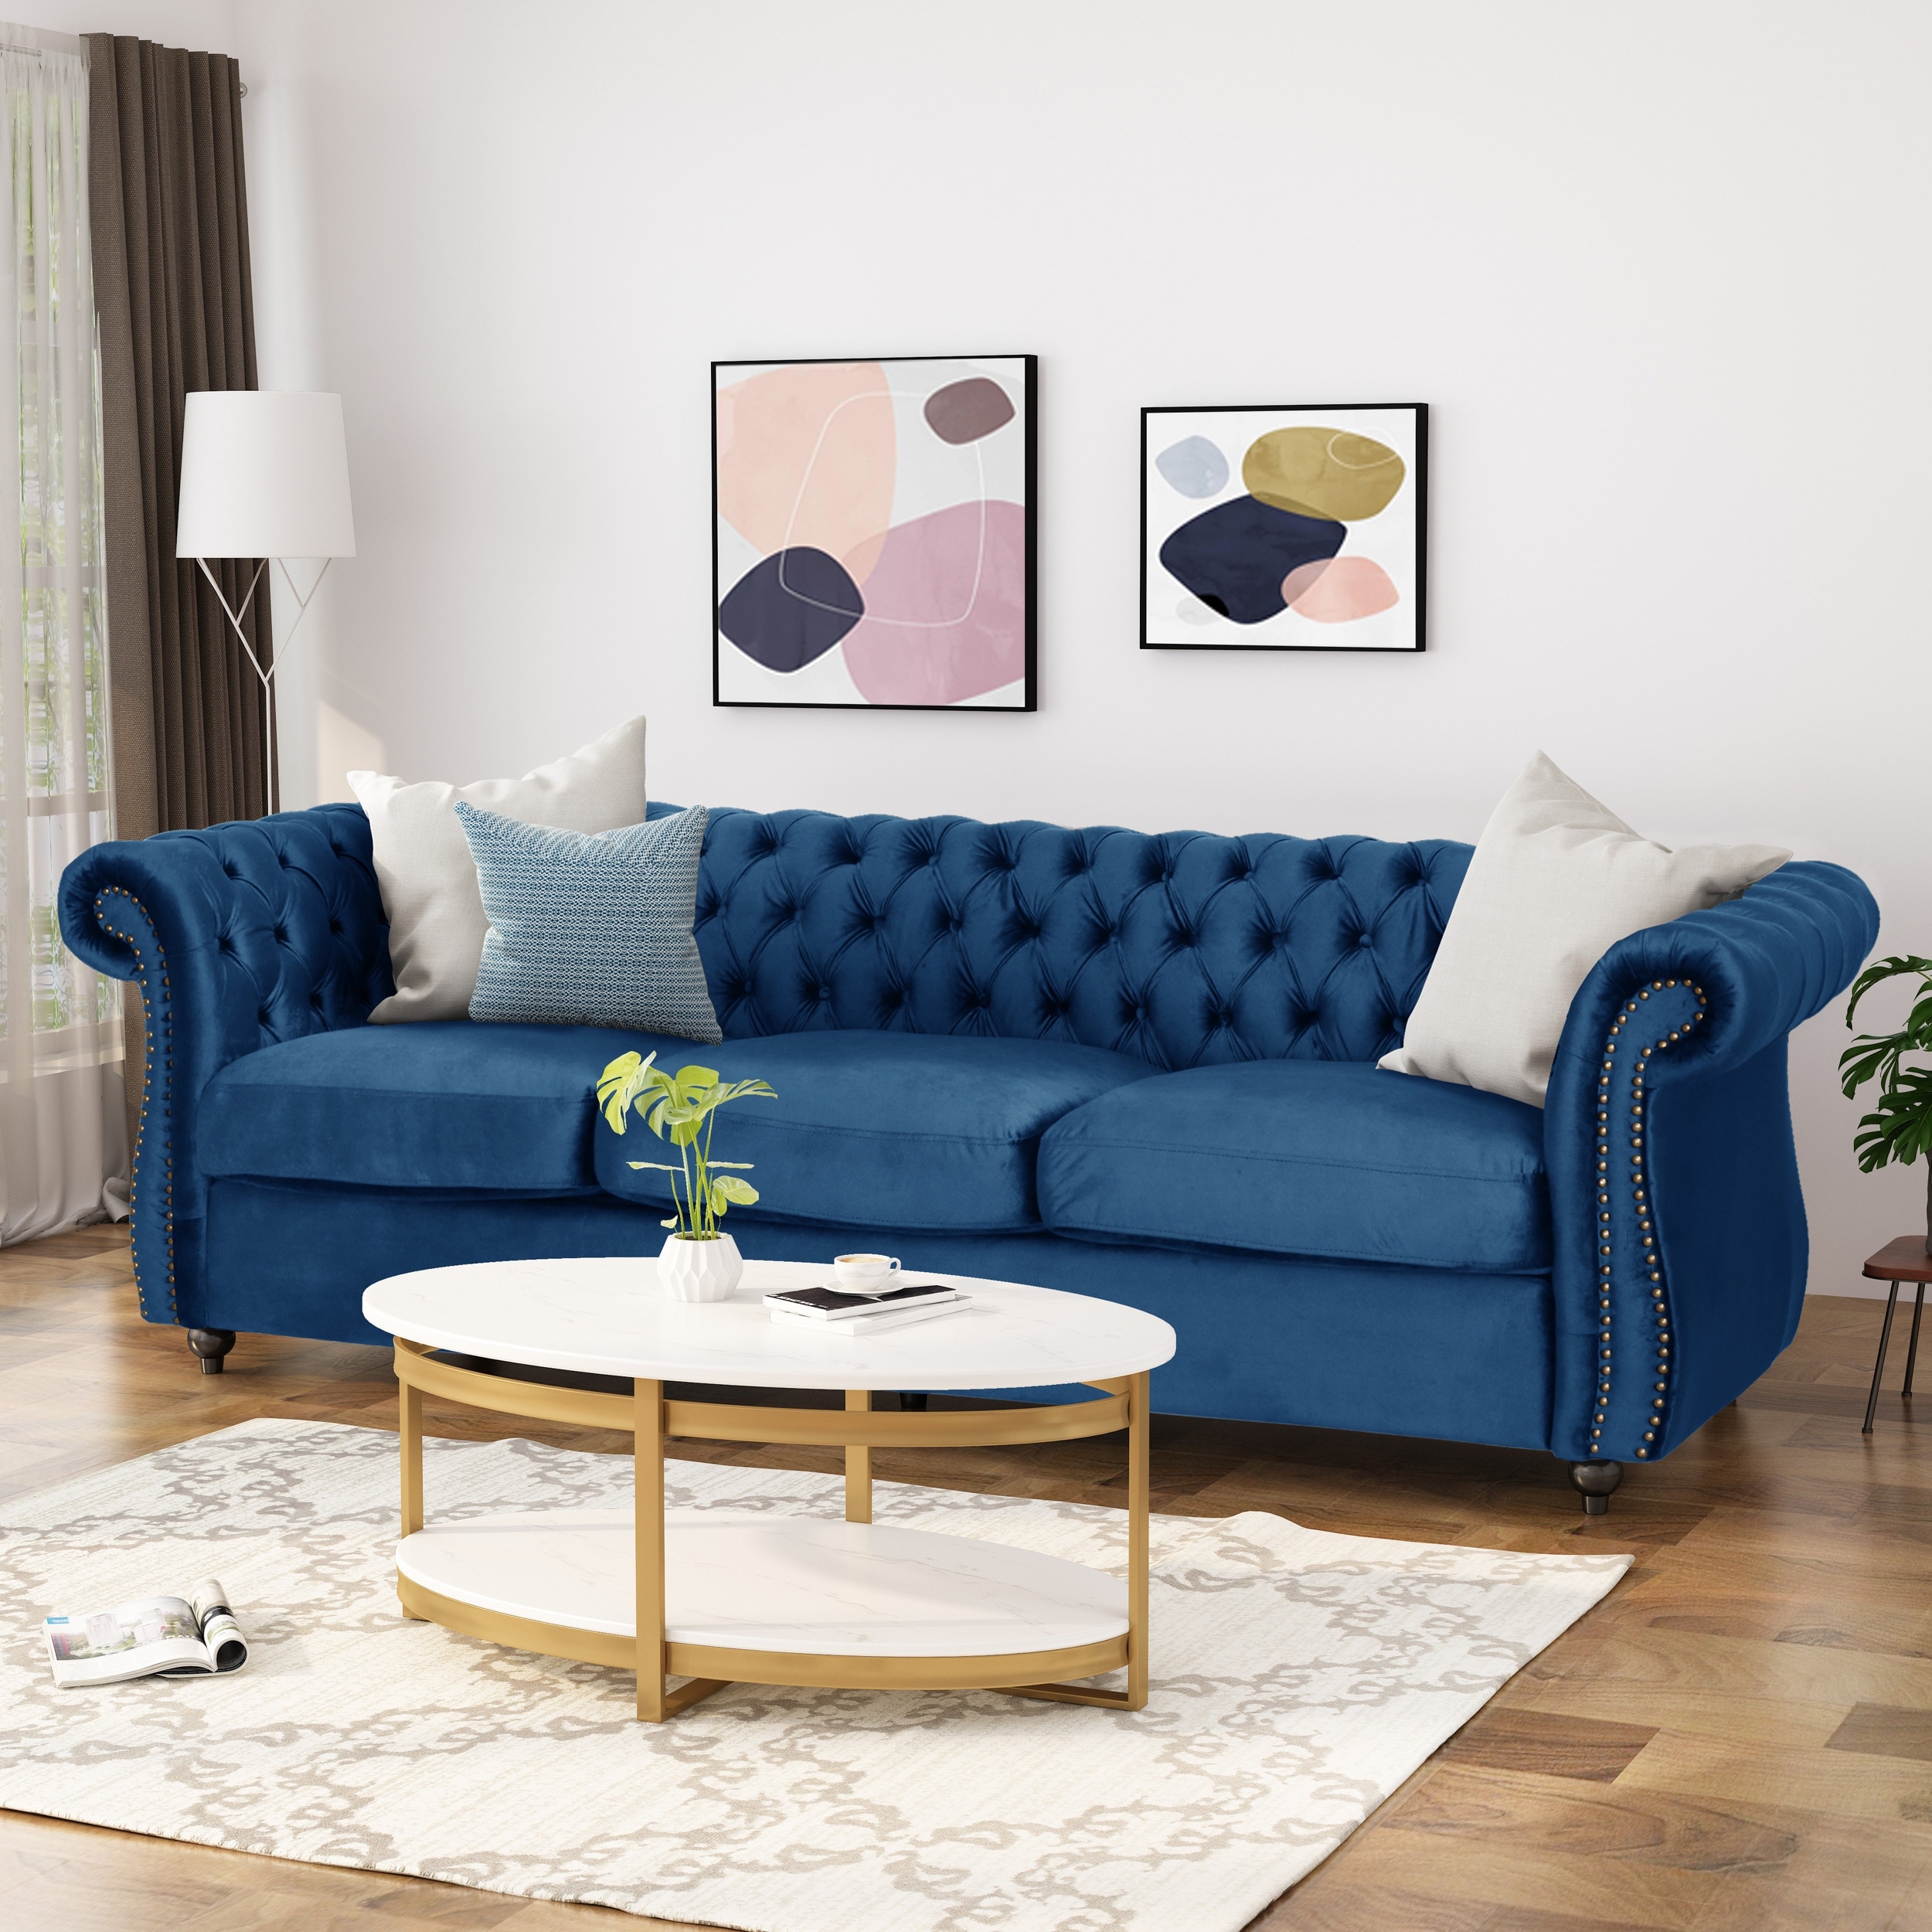 https://ak1.ostkcdn.com/images/products/is/images/direct/890419e4a05ec25d37a7f67ef8f65132d3f4f52b/Somerville-Chesterfield-Tufted-Jewel-Toned-Velvet-Sofa-with-Scroll-Arms-by-Christopher-Knight-Home.jpg